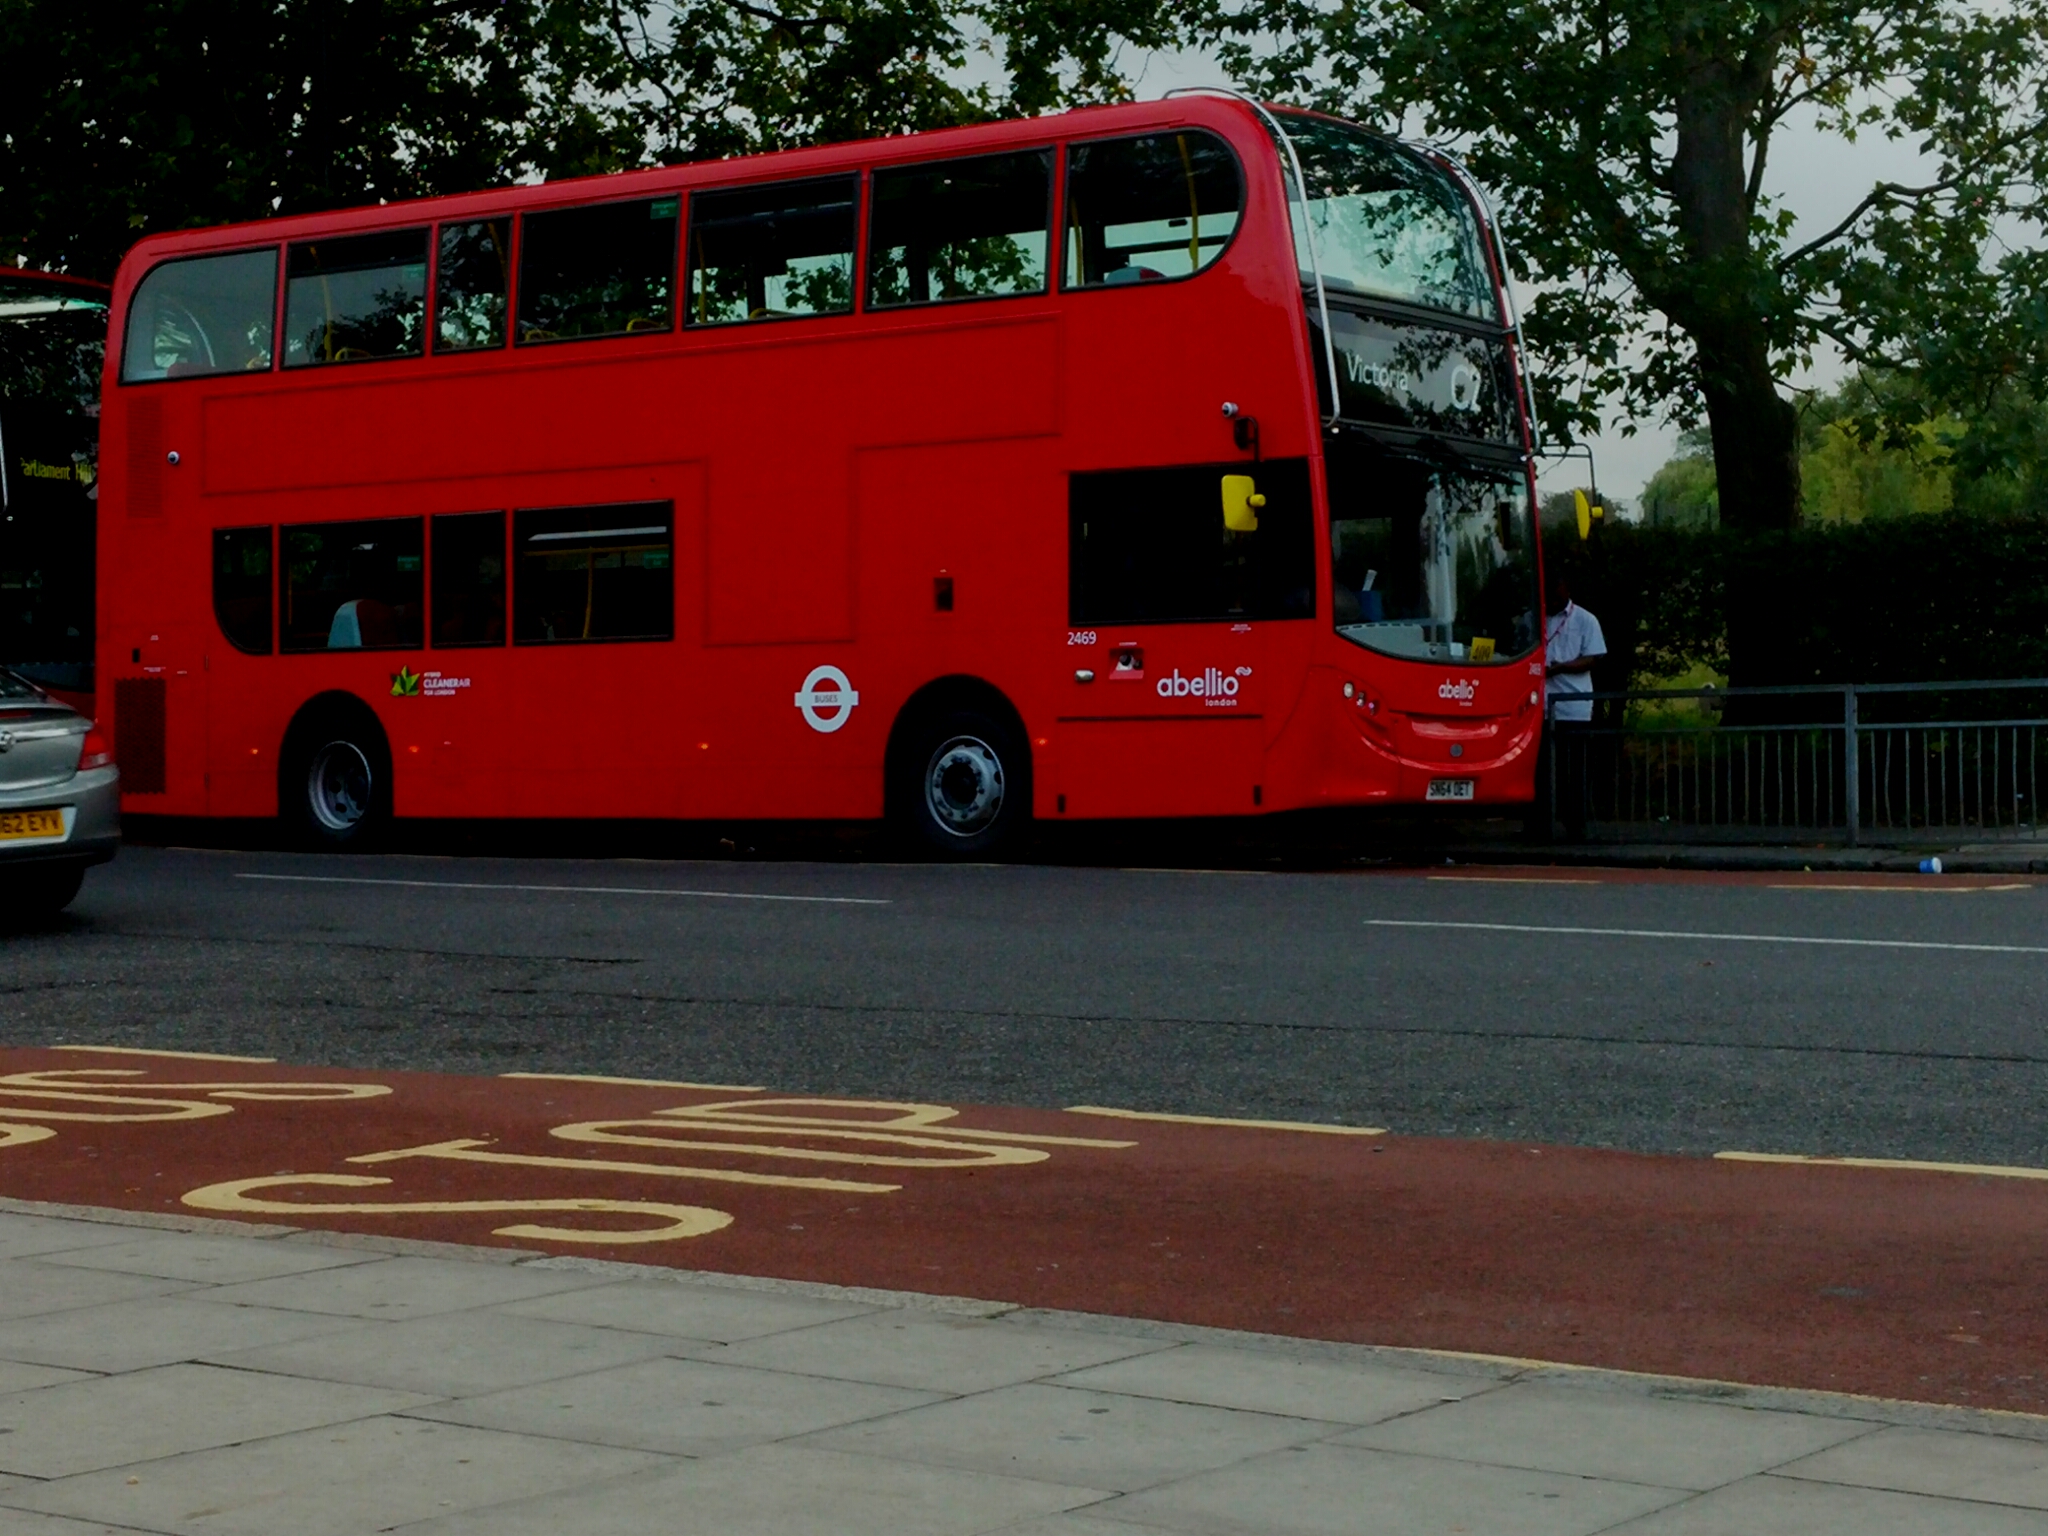 two red double decker busses one is a ford mustang